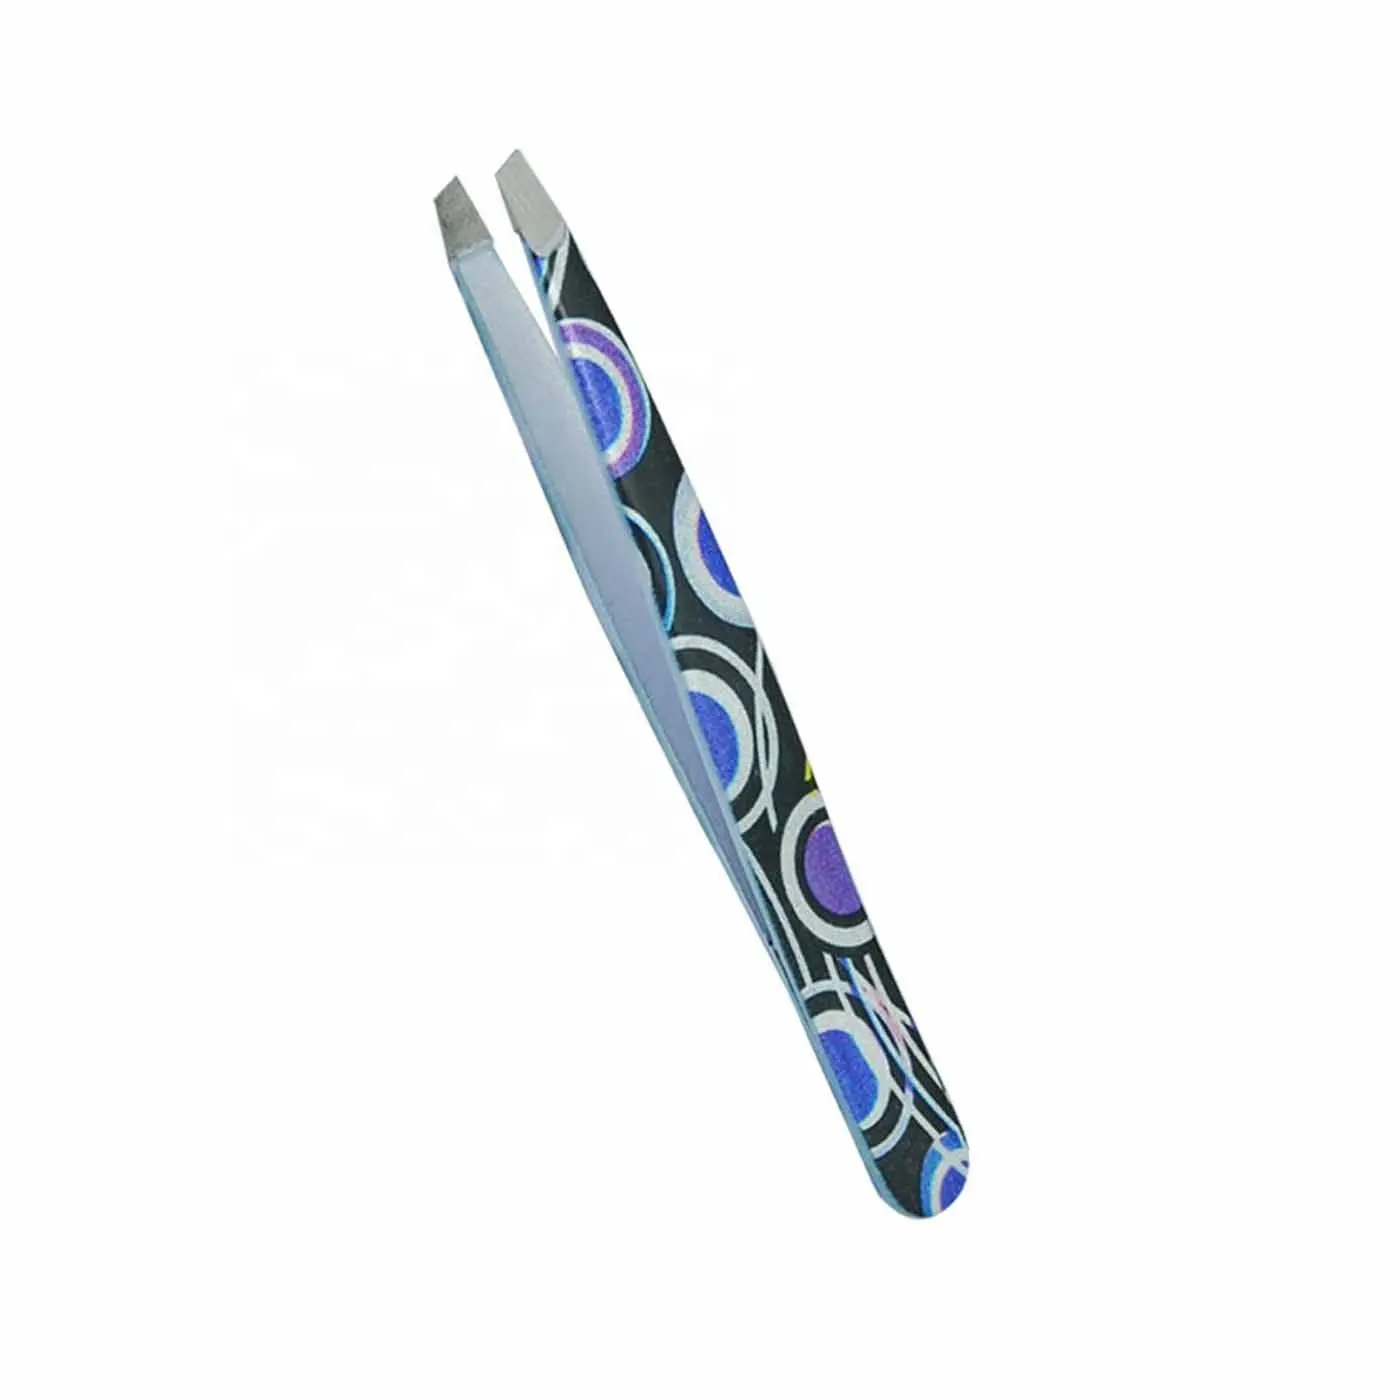 Colorful Stainless Steel Custom Eyebrow Tweezers Stainless Steel Eyebrow Plucking Eyebrow Tweezers BY SIGAL MEDCO